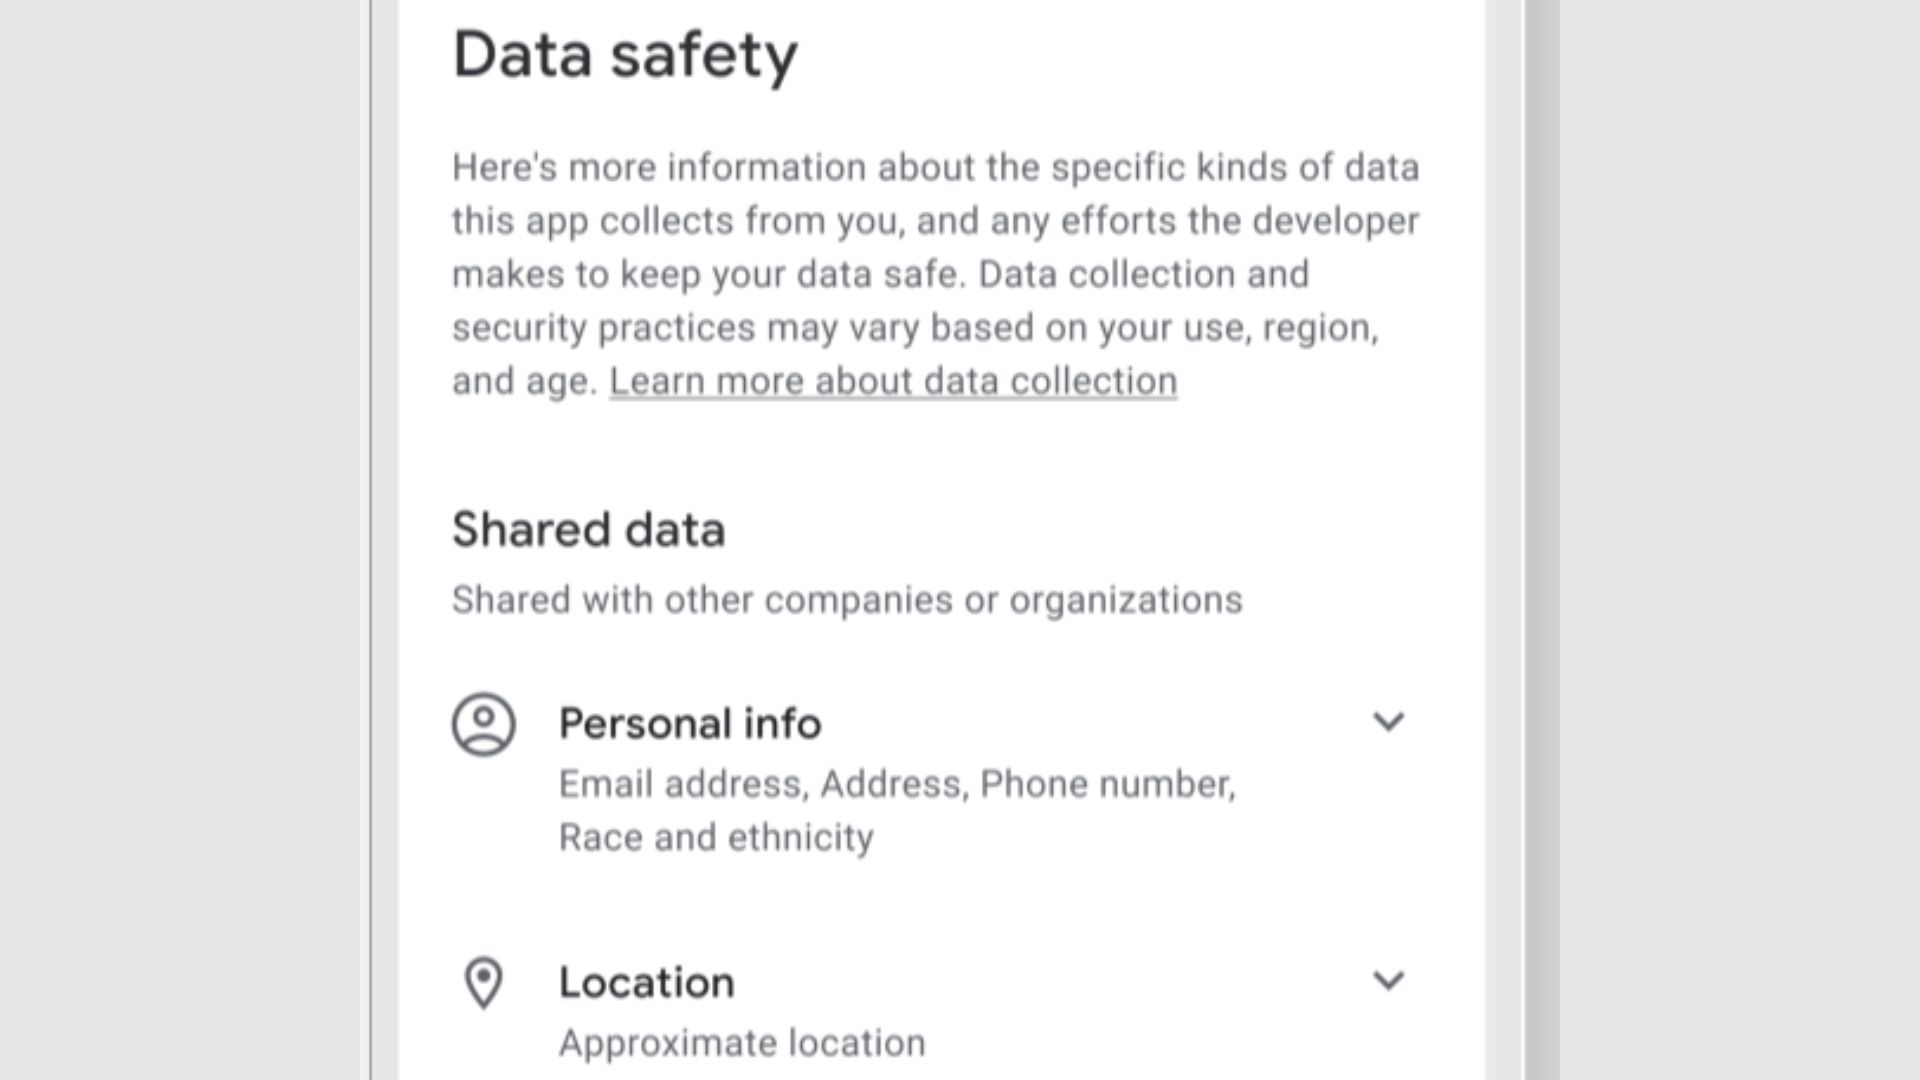 Data safety section in Android Play Store to go live in February 2022